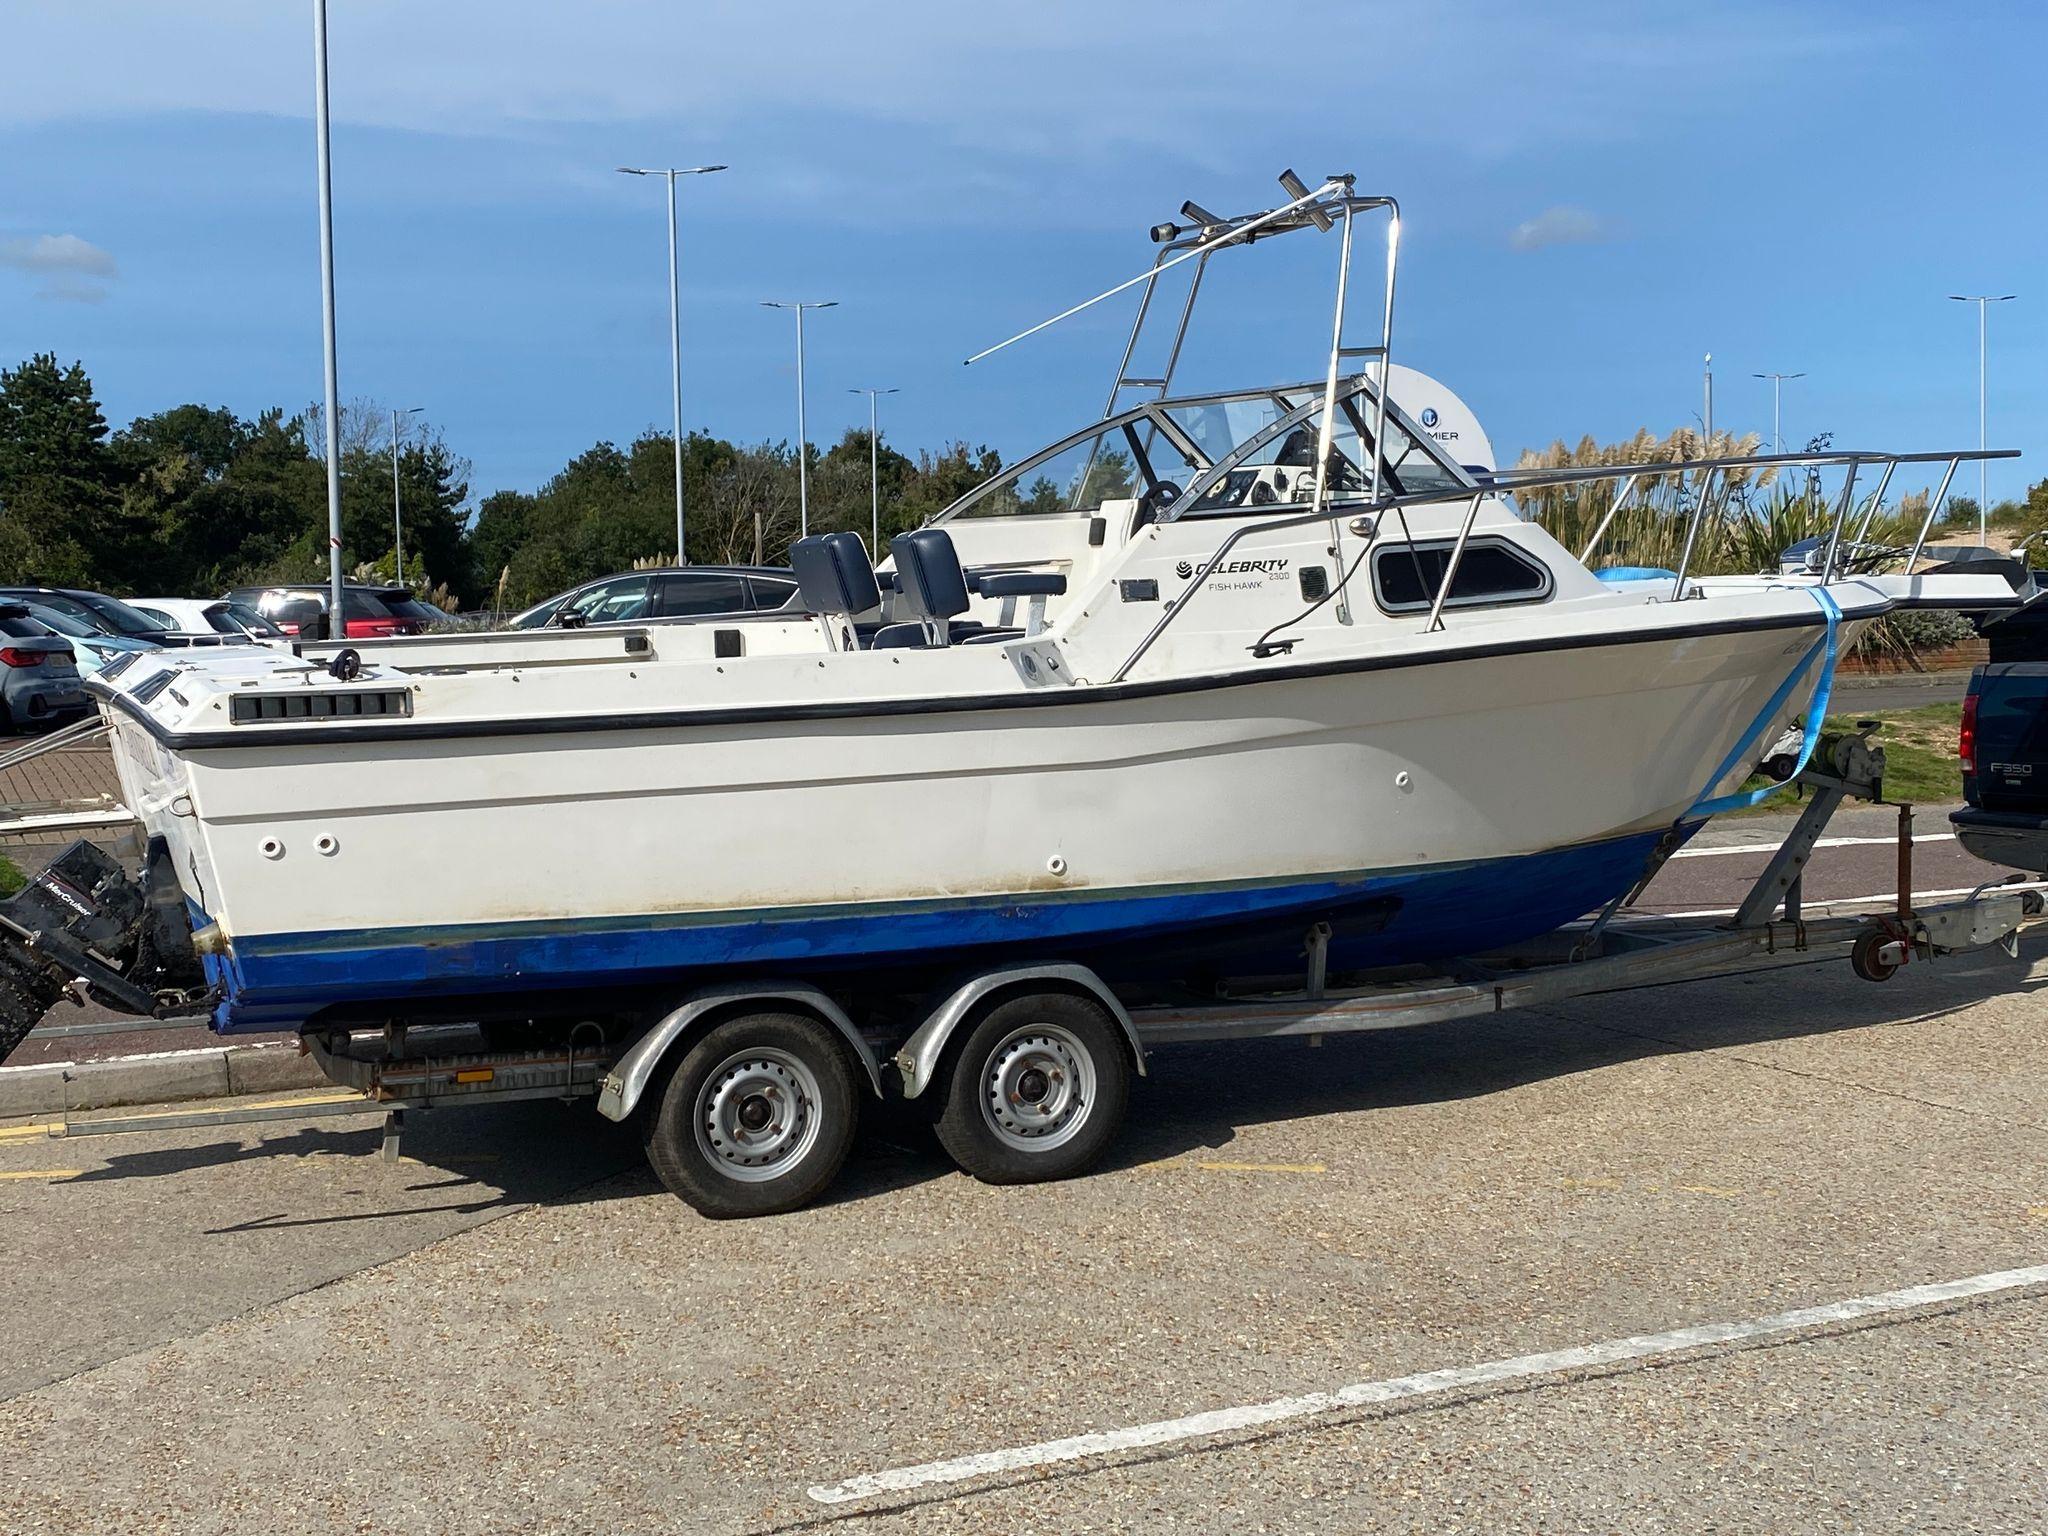 Used Celebrity Fish Hawk 23 boats for sale - boats.com